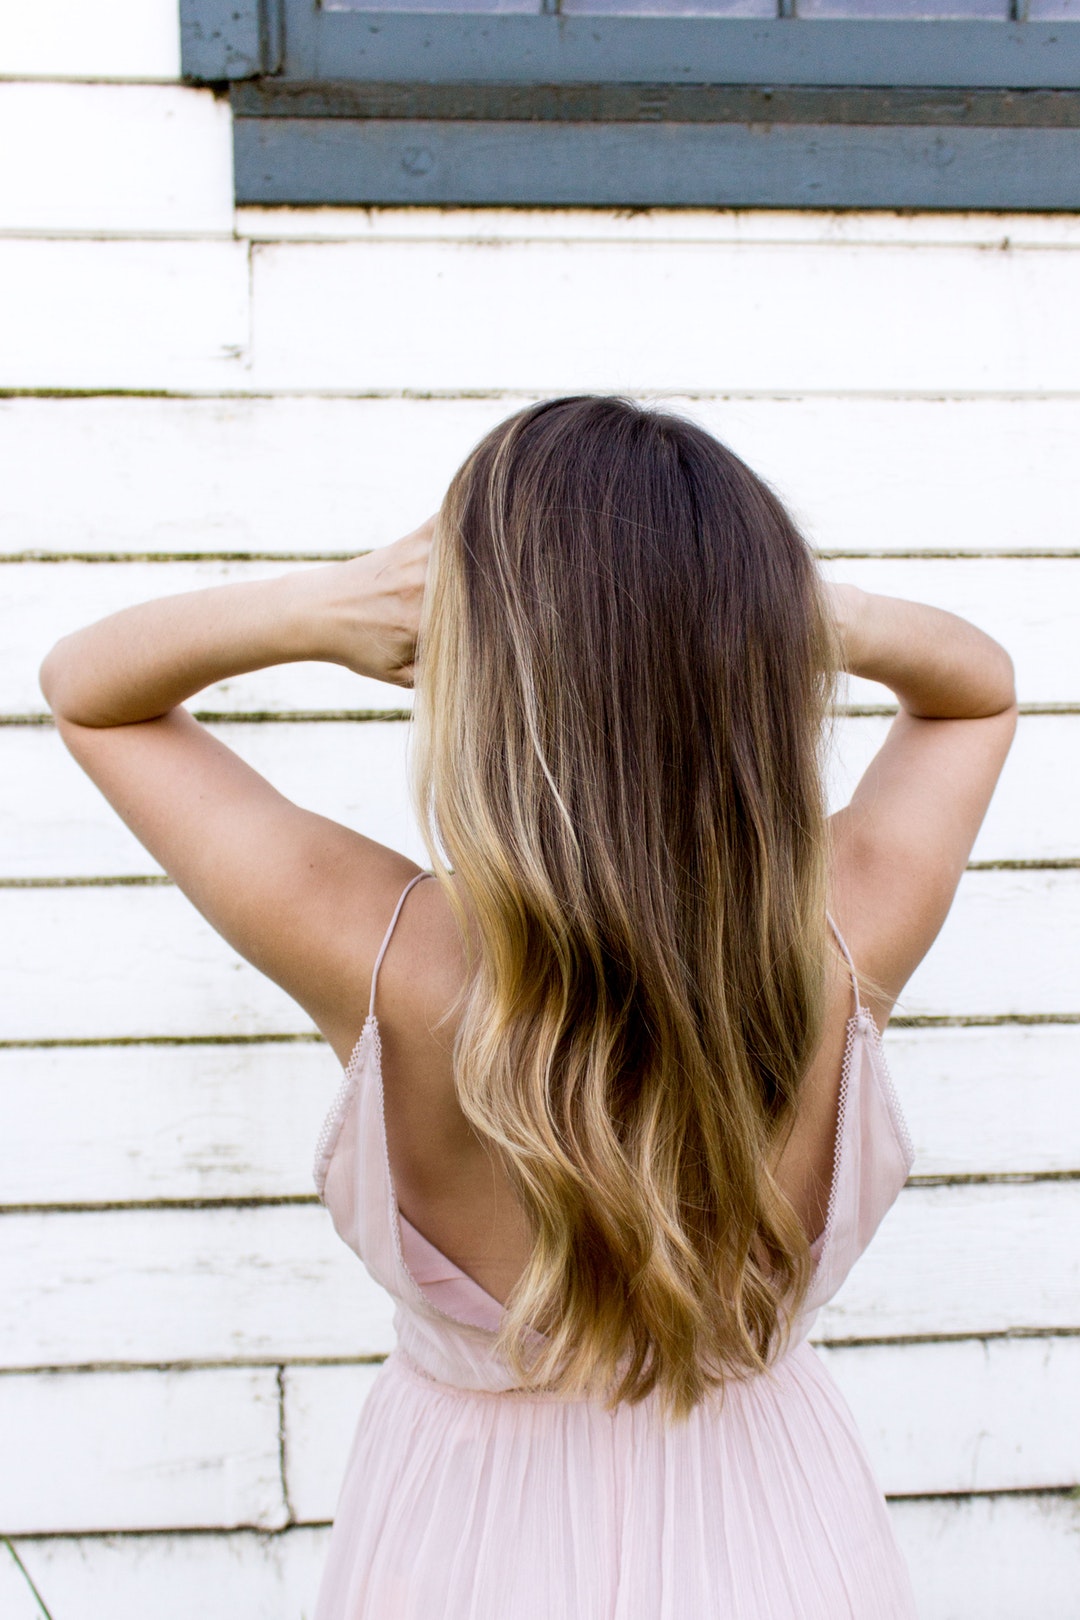 Hair Styling Secrets: How to Make Thin Hair Look Thicker